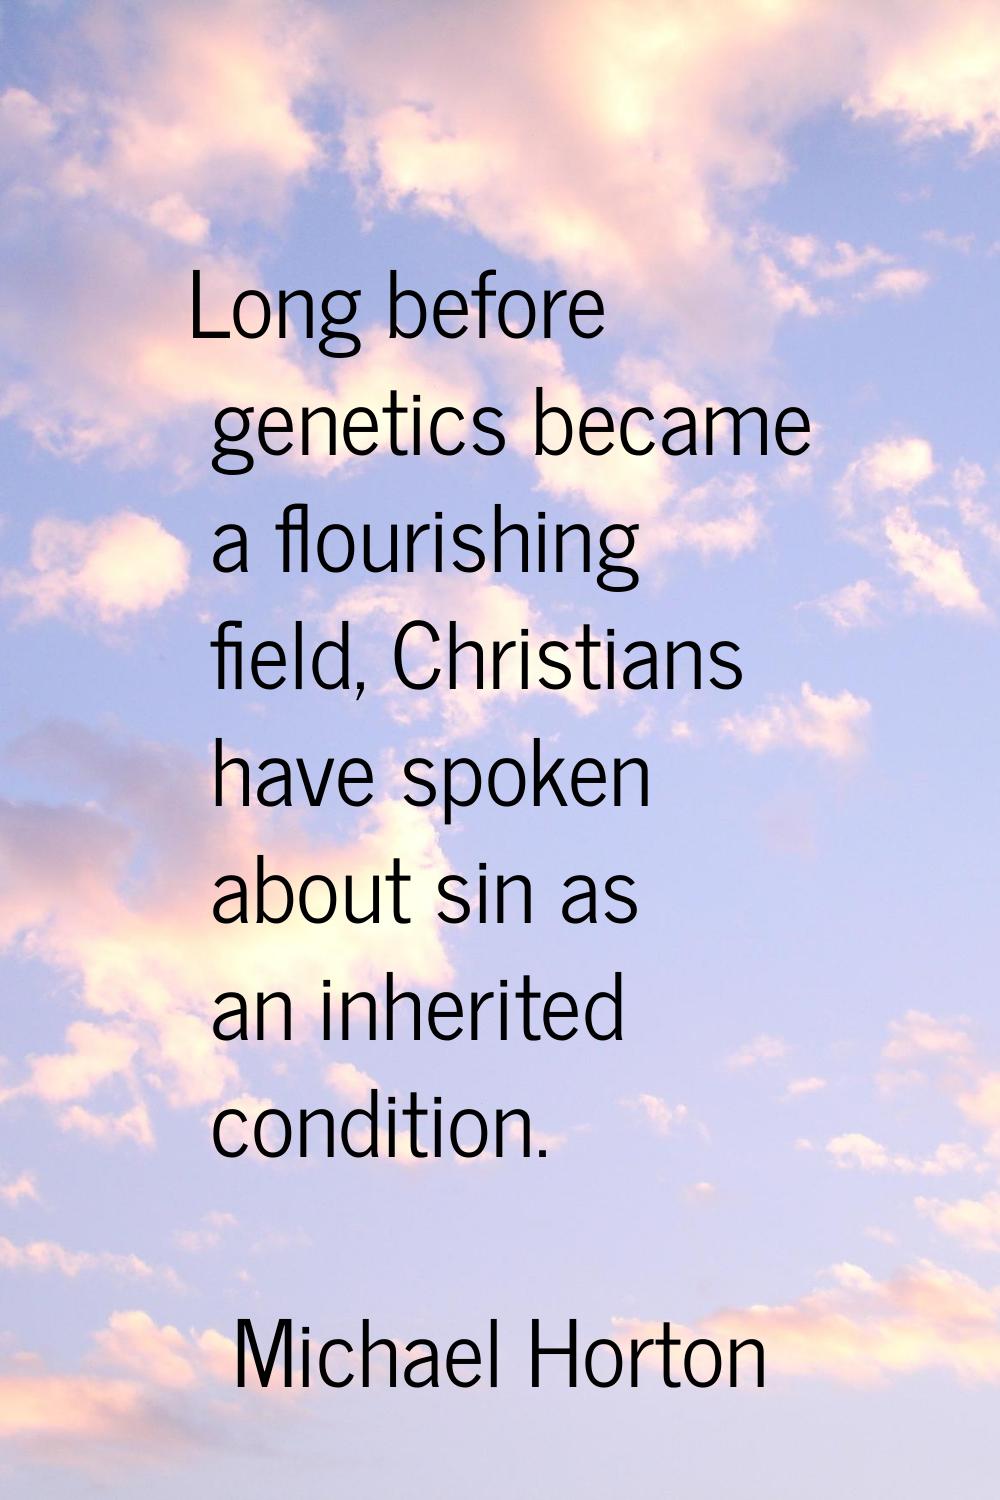 Long before genetics became a flourishing field, Christians have spoken about sin as an inherited c